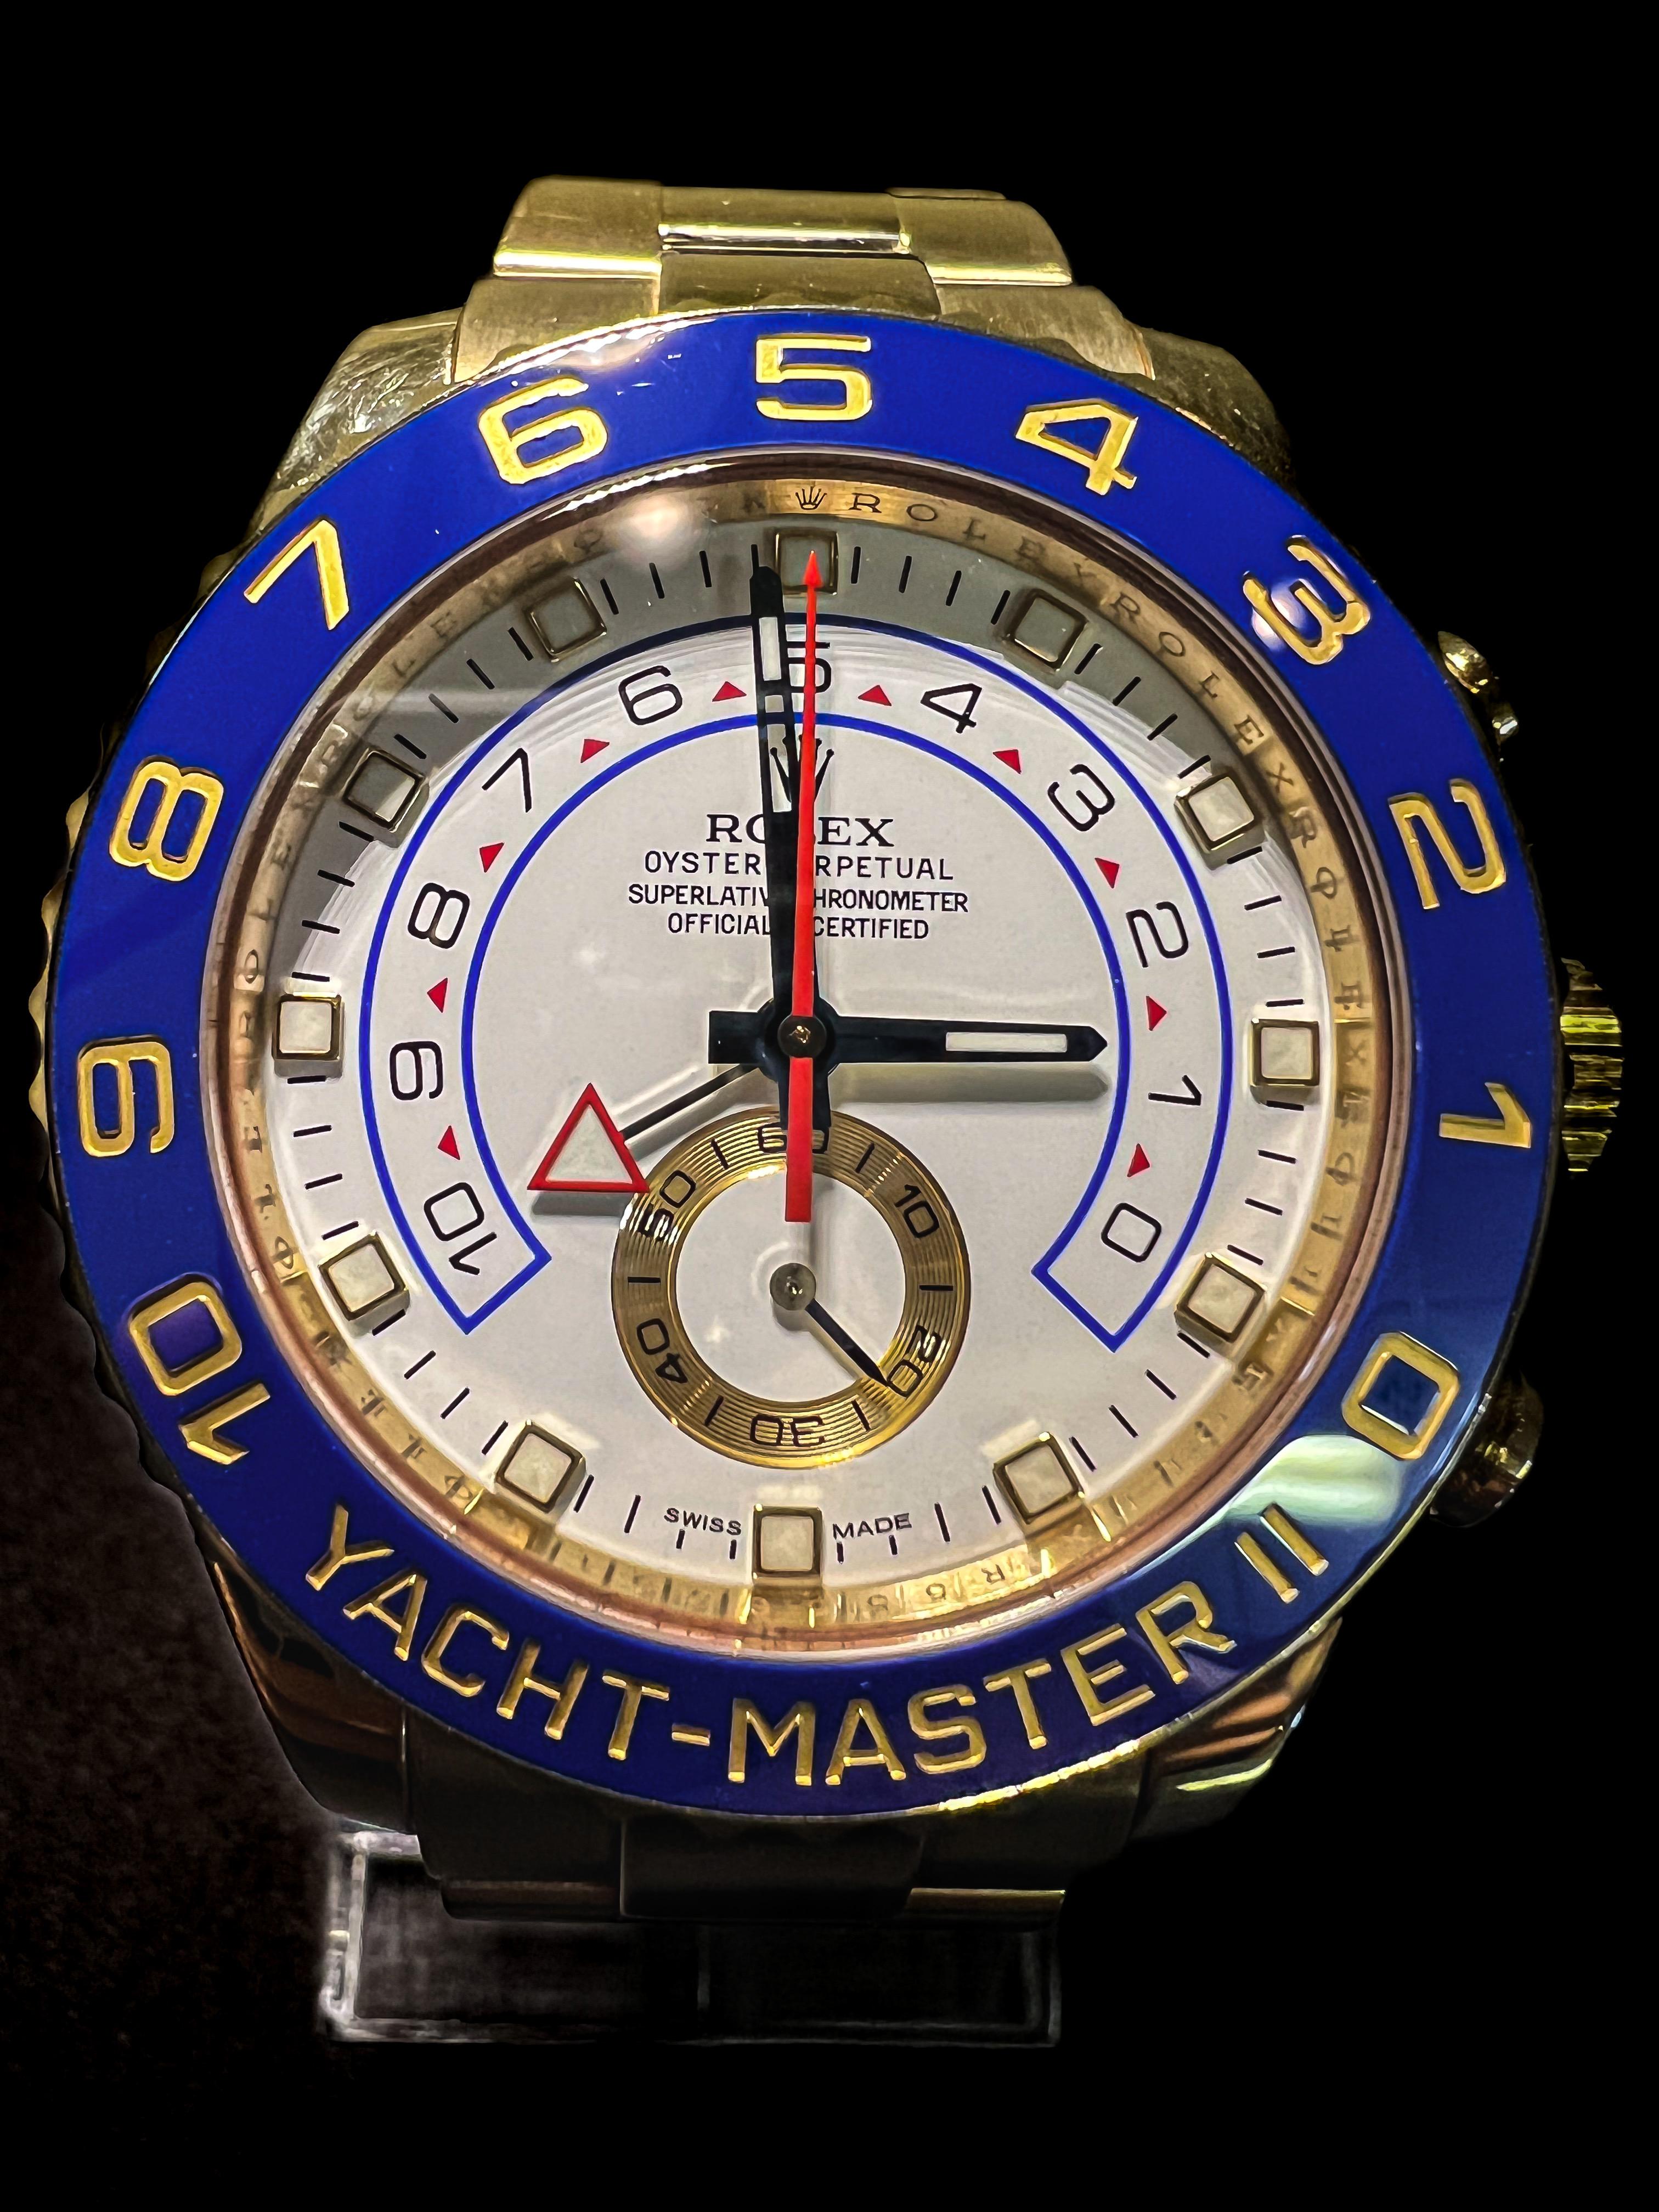 Brand: Rolex
Model: Yacht-master Ii
Type: Wristwatch
Model Name: Yacht-Master II
Reference #: 116688
Lug to Lug: 51mm
Case Diameter: 44mm
Bezel Material: Ceramic
Case Material: Yellow Gold
Movement: Automatic 4161
Weight: 249.2g
Bracelet: 18k Yellow